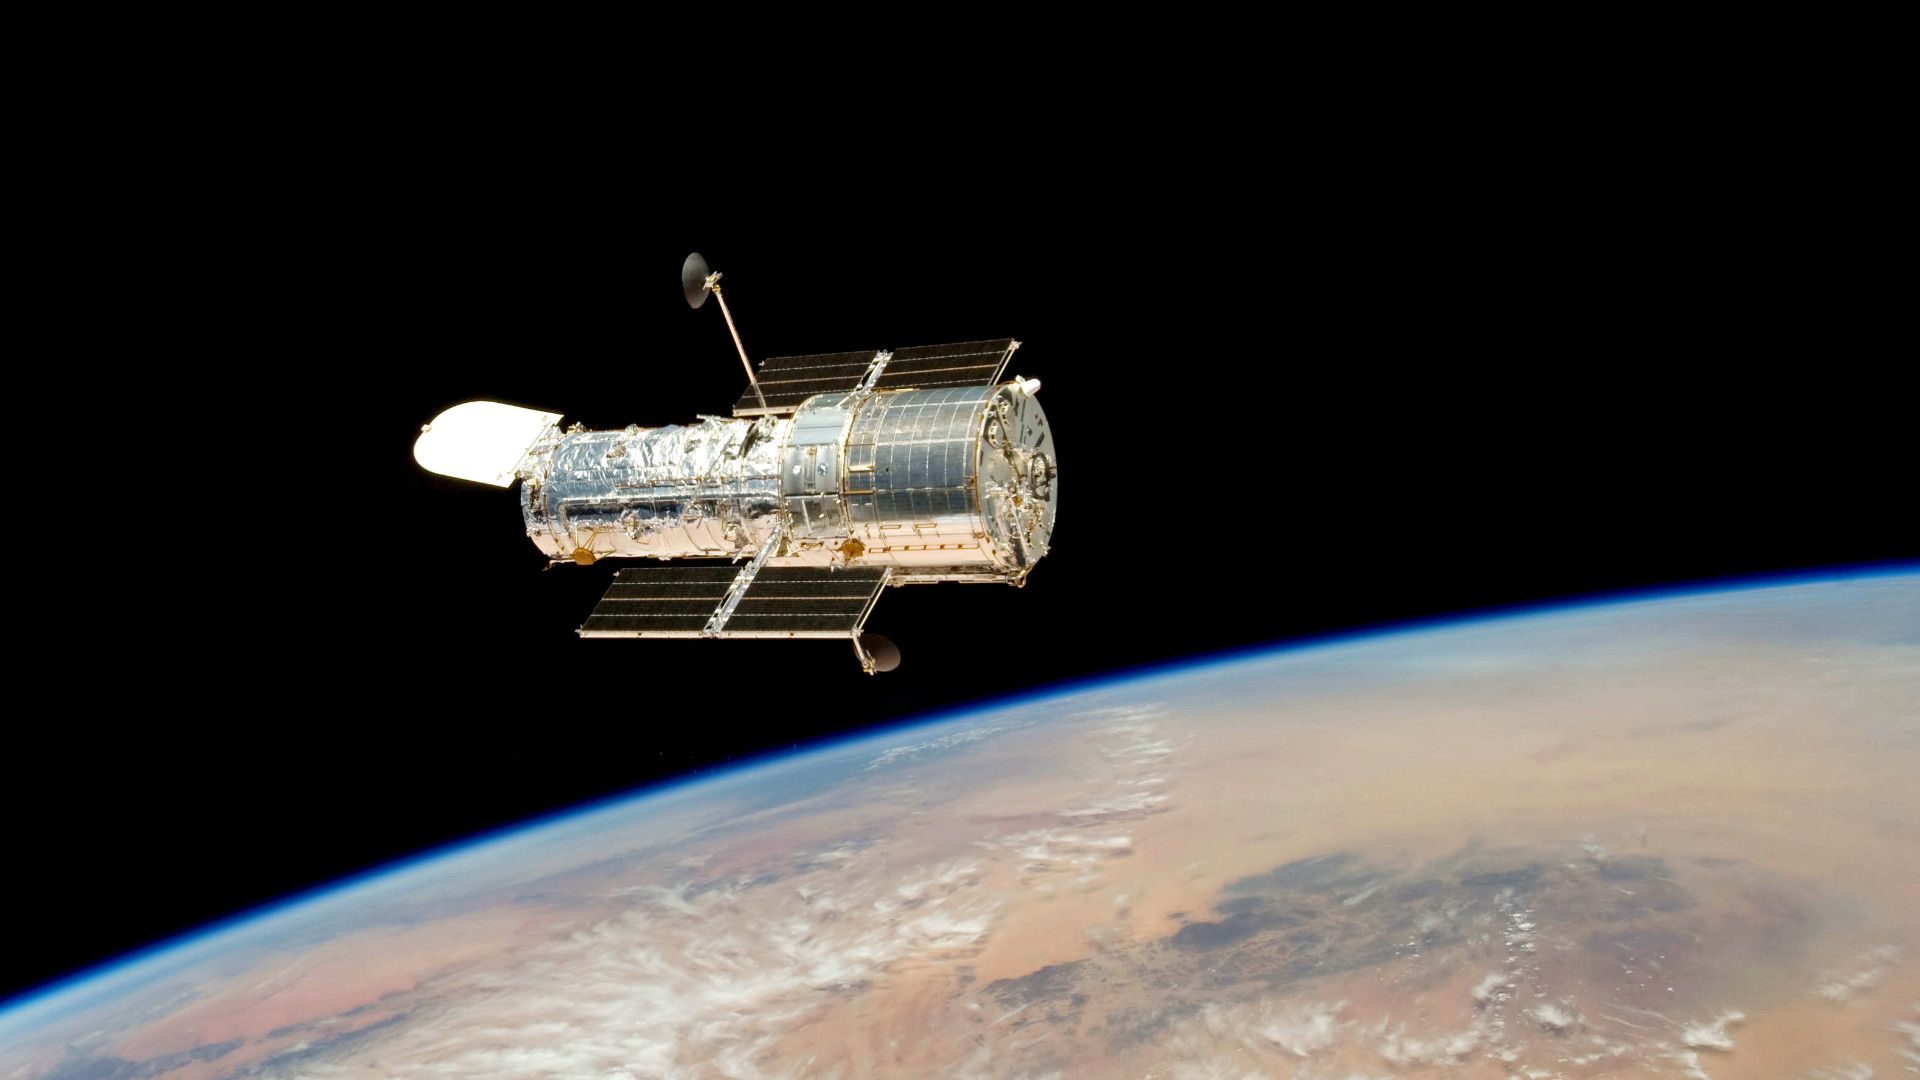 NASA says there is no quick fix for the Hubble Space Telescope